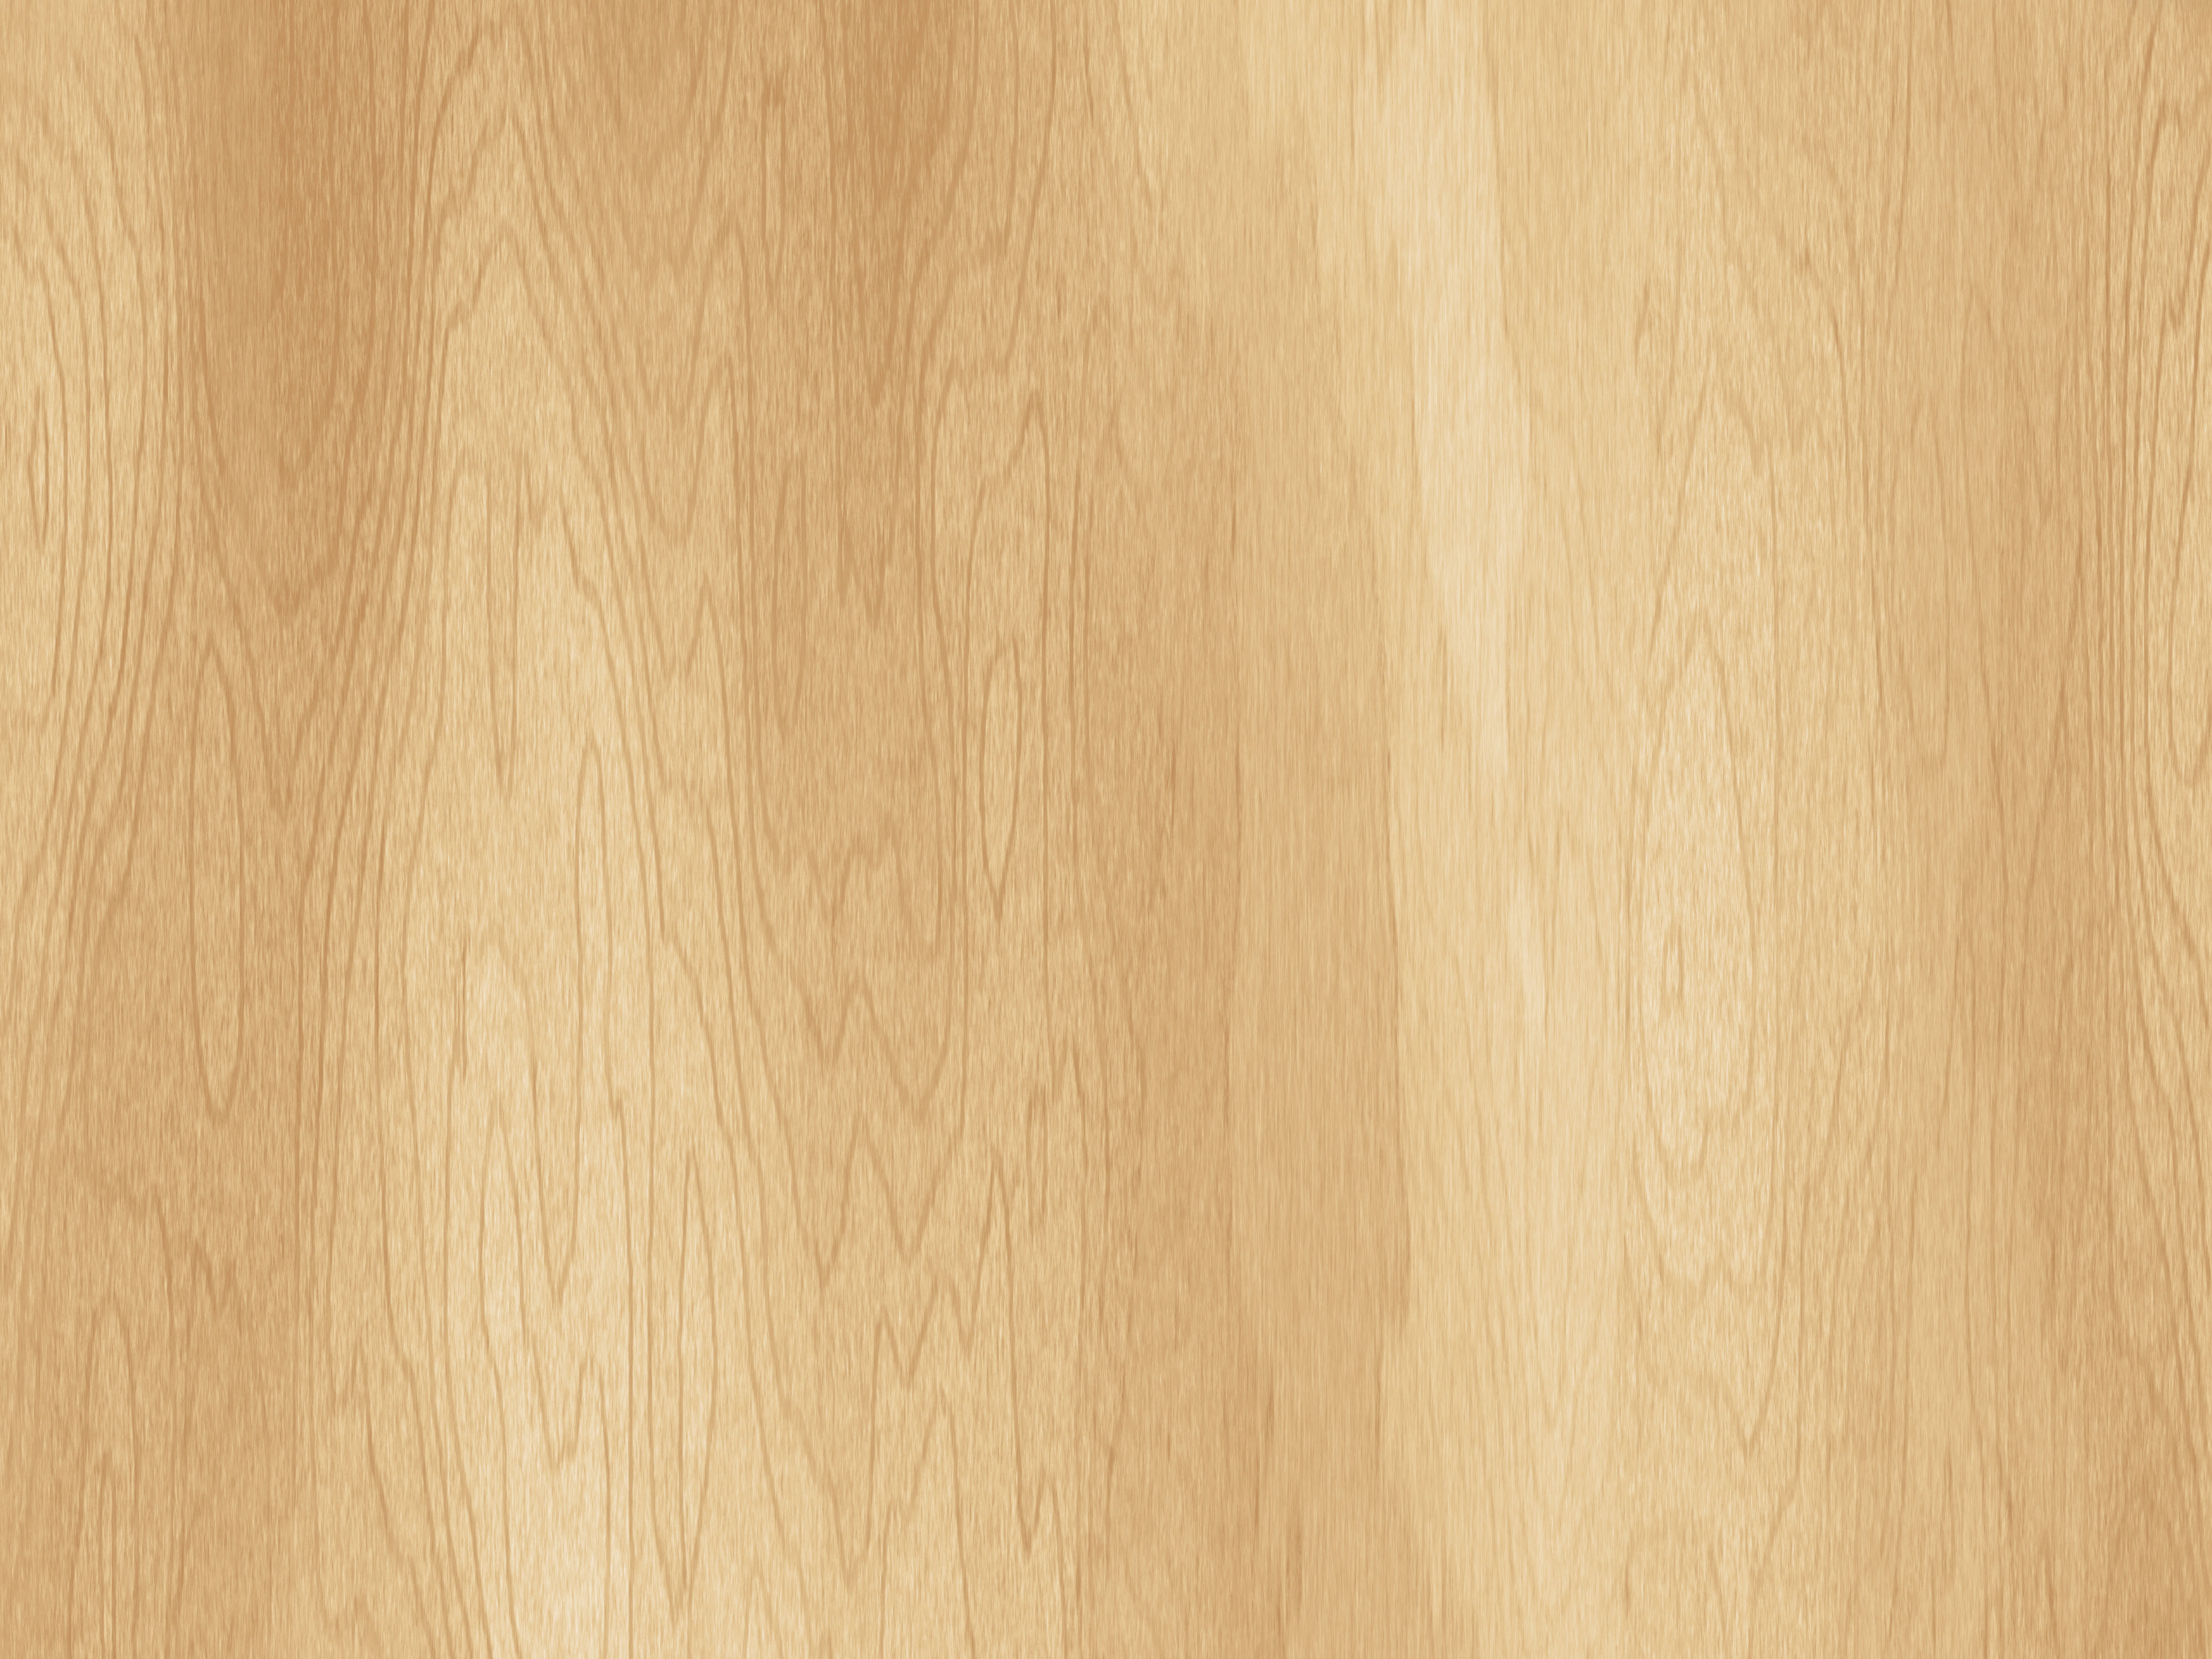 wood texture, download photo, background, texture, light tree wood